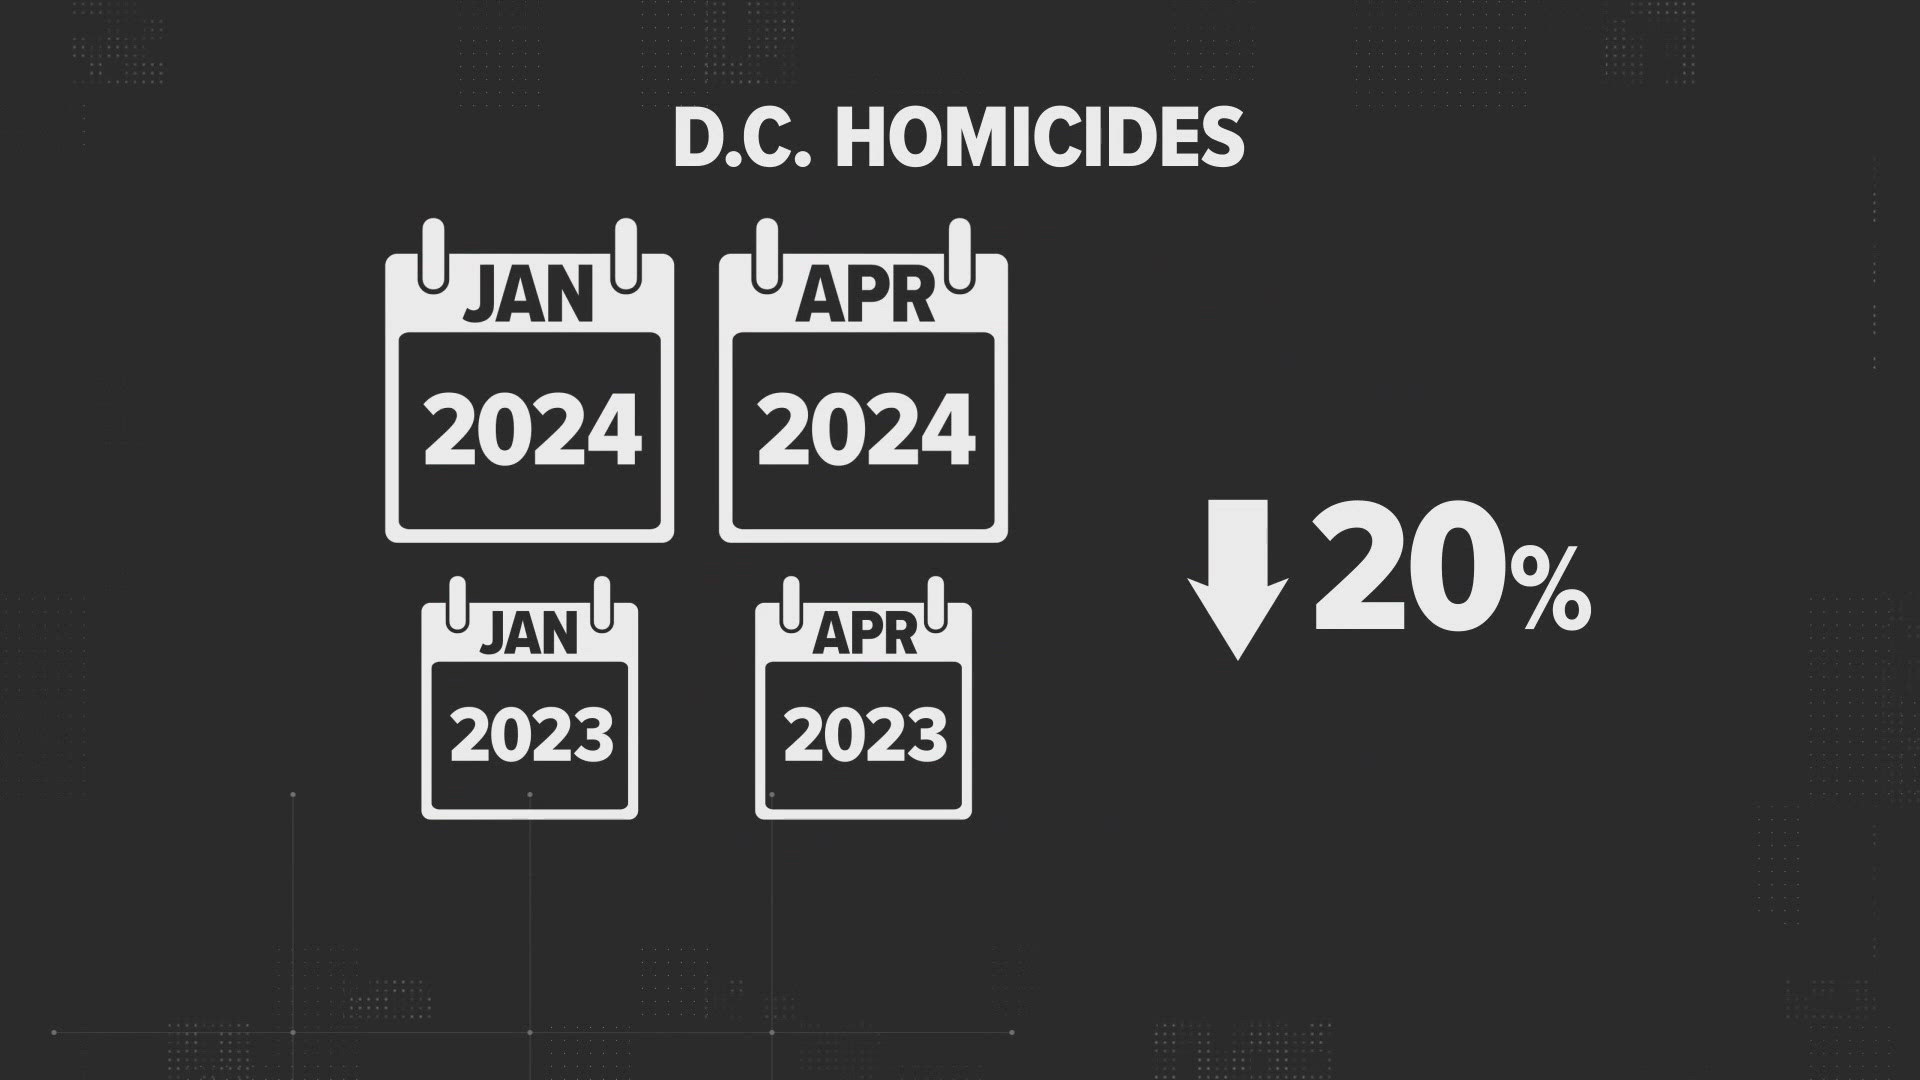 DC Mayor Muriel Bowser. She said the District recently went more than a week without a homicide. So let's look at the numbers to Verify if her statement is true.